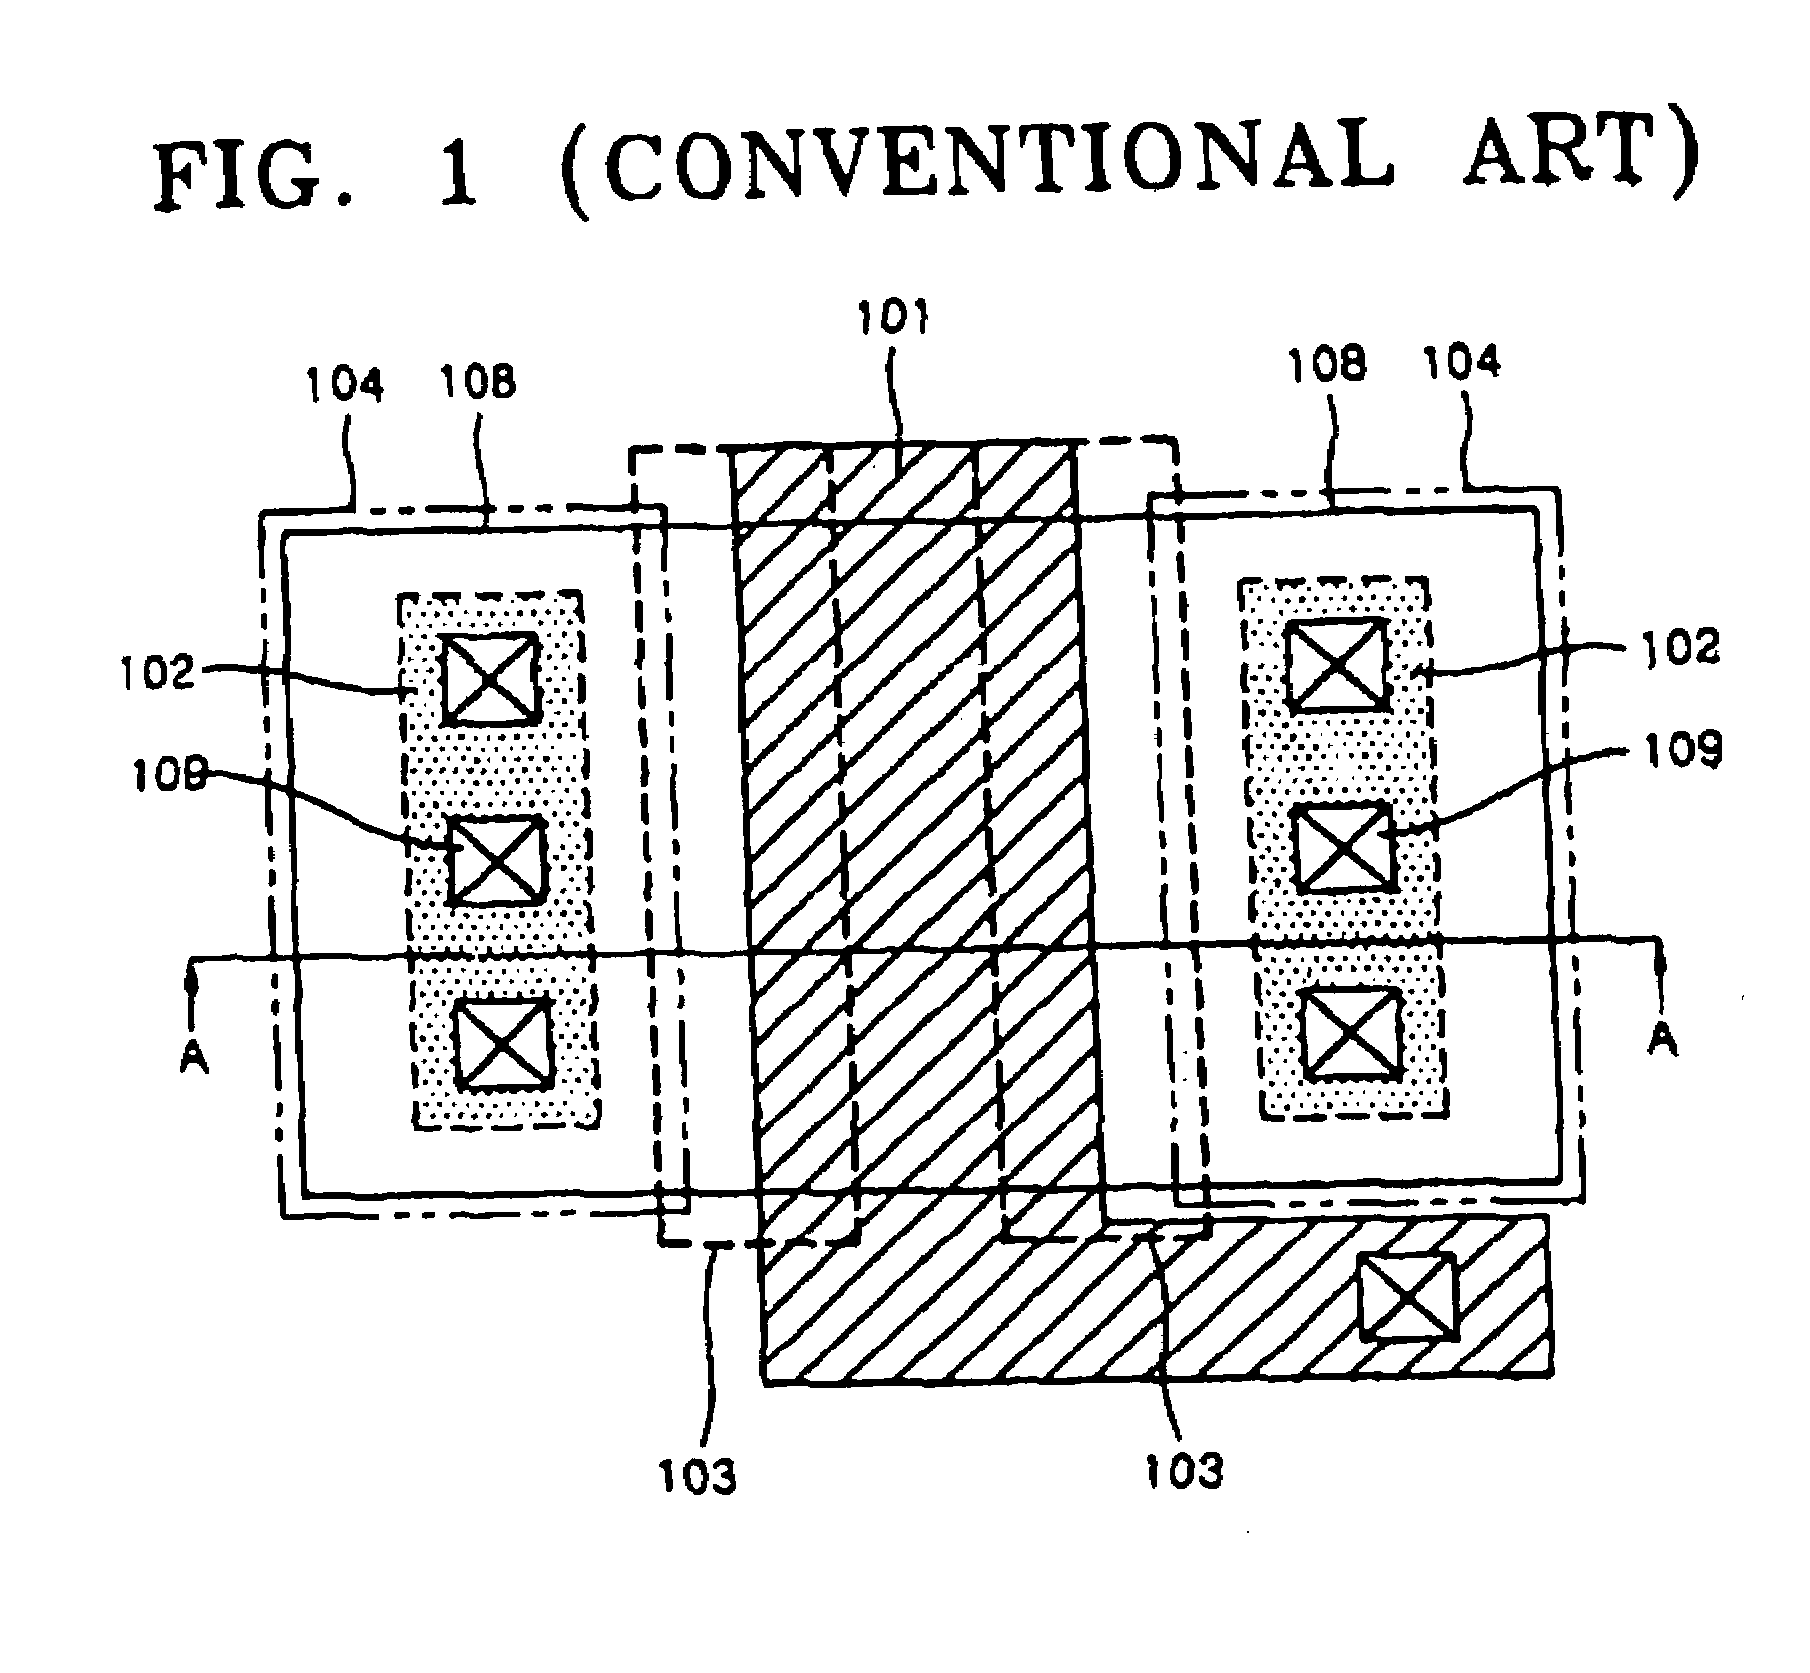 Semiconductor integrated circuit device and method of fabricating the same